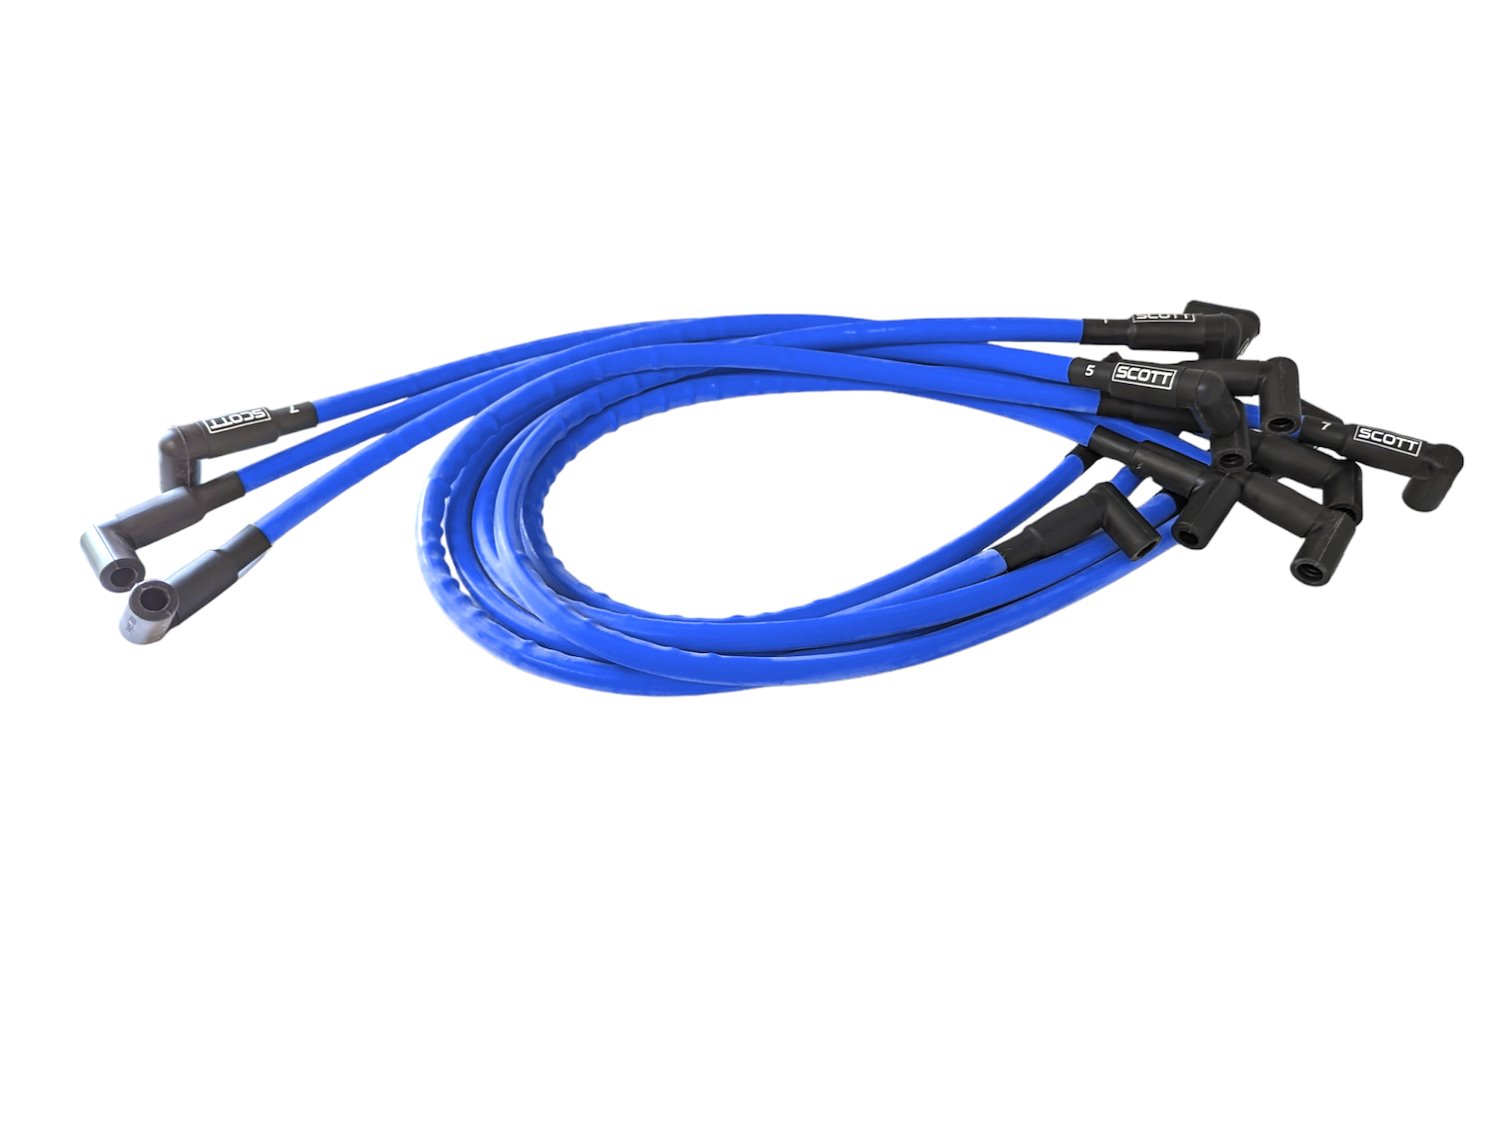 SPW300-CH-407-4 Super Mag Fiberglass-Oversleeved Spark Plug Wire Set for Small Block Chevy, Under Header [Blue]